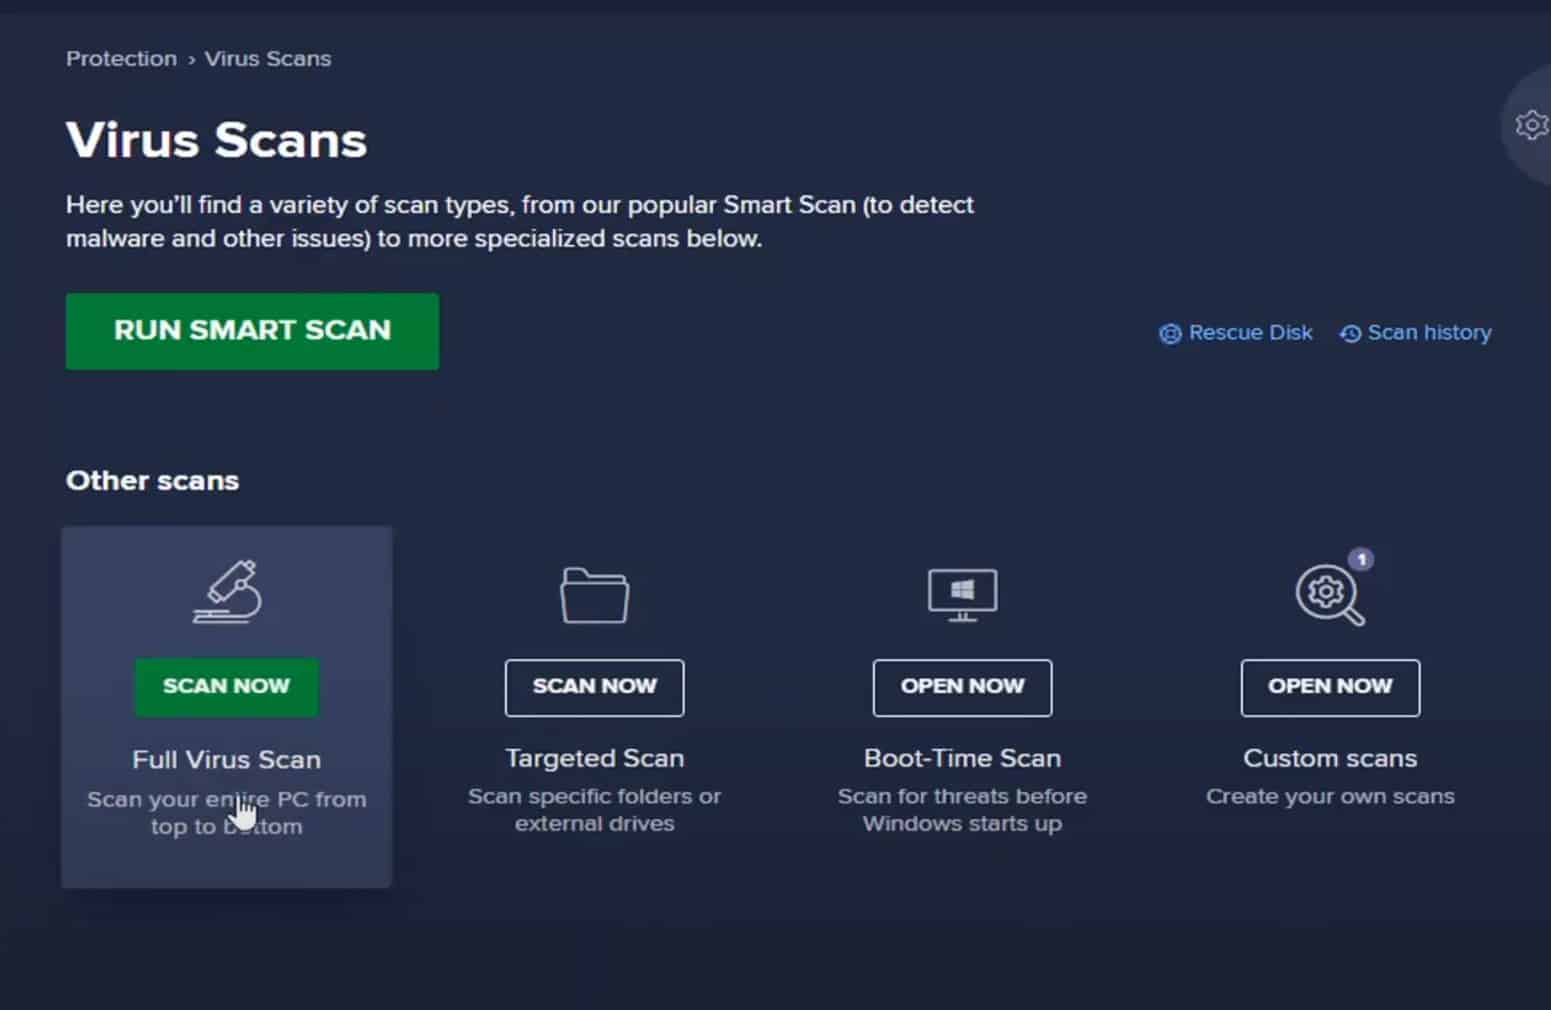 avast is showing wipersoft has a virus in it